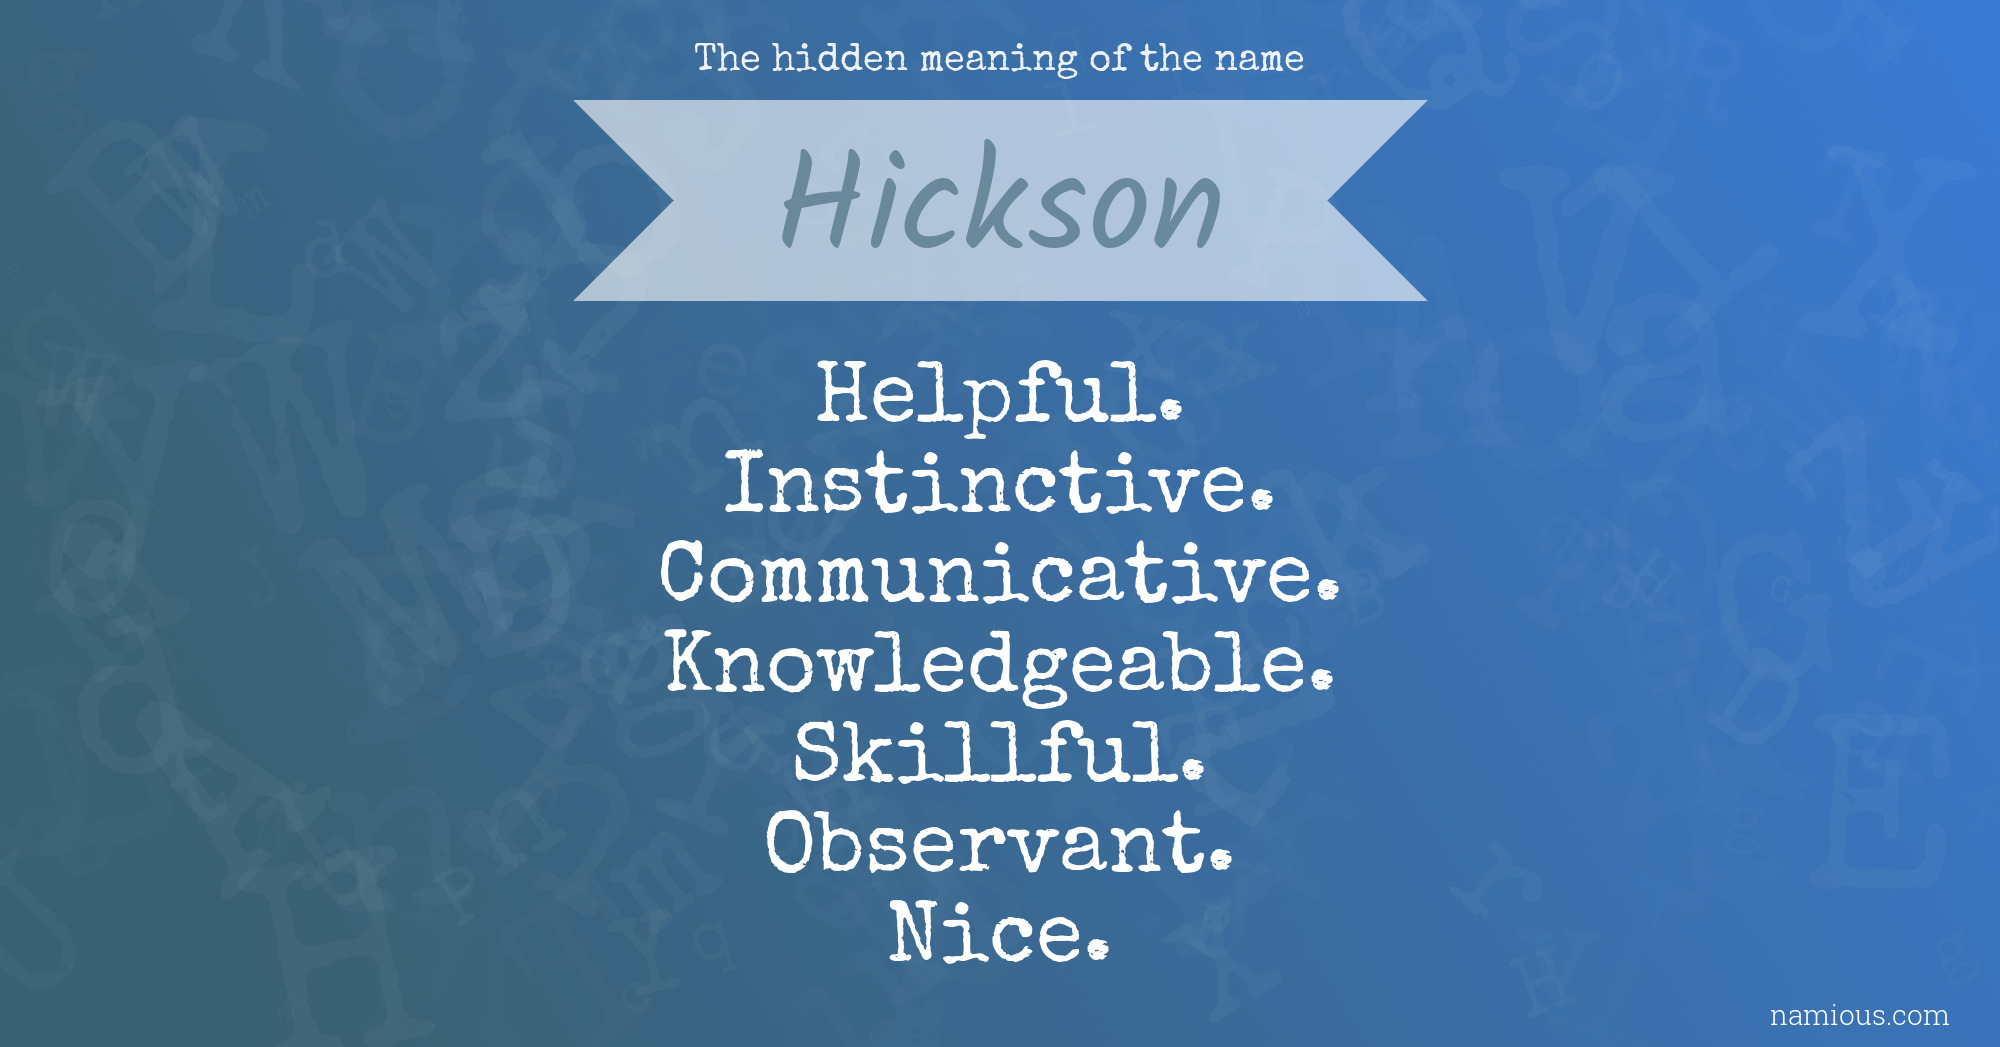 The hidden meaning of the name Hickson